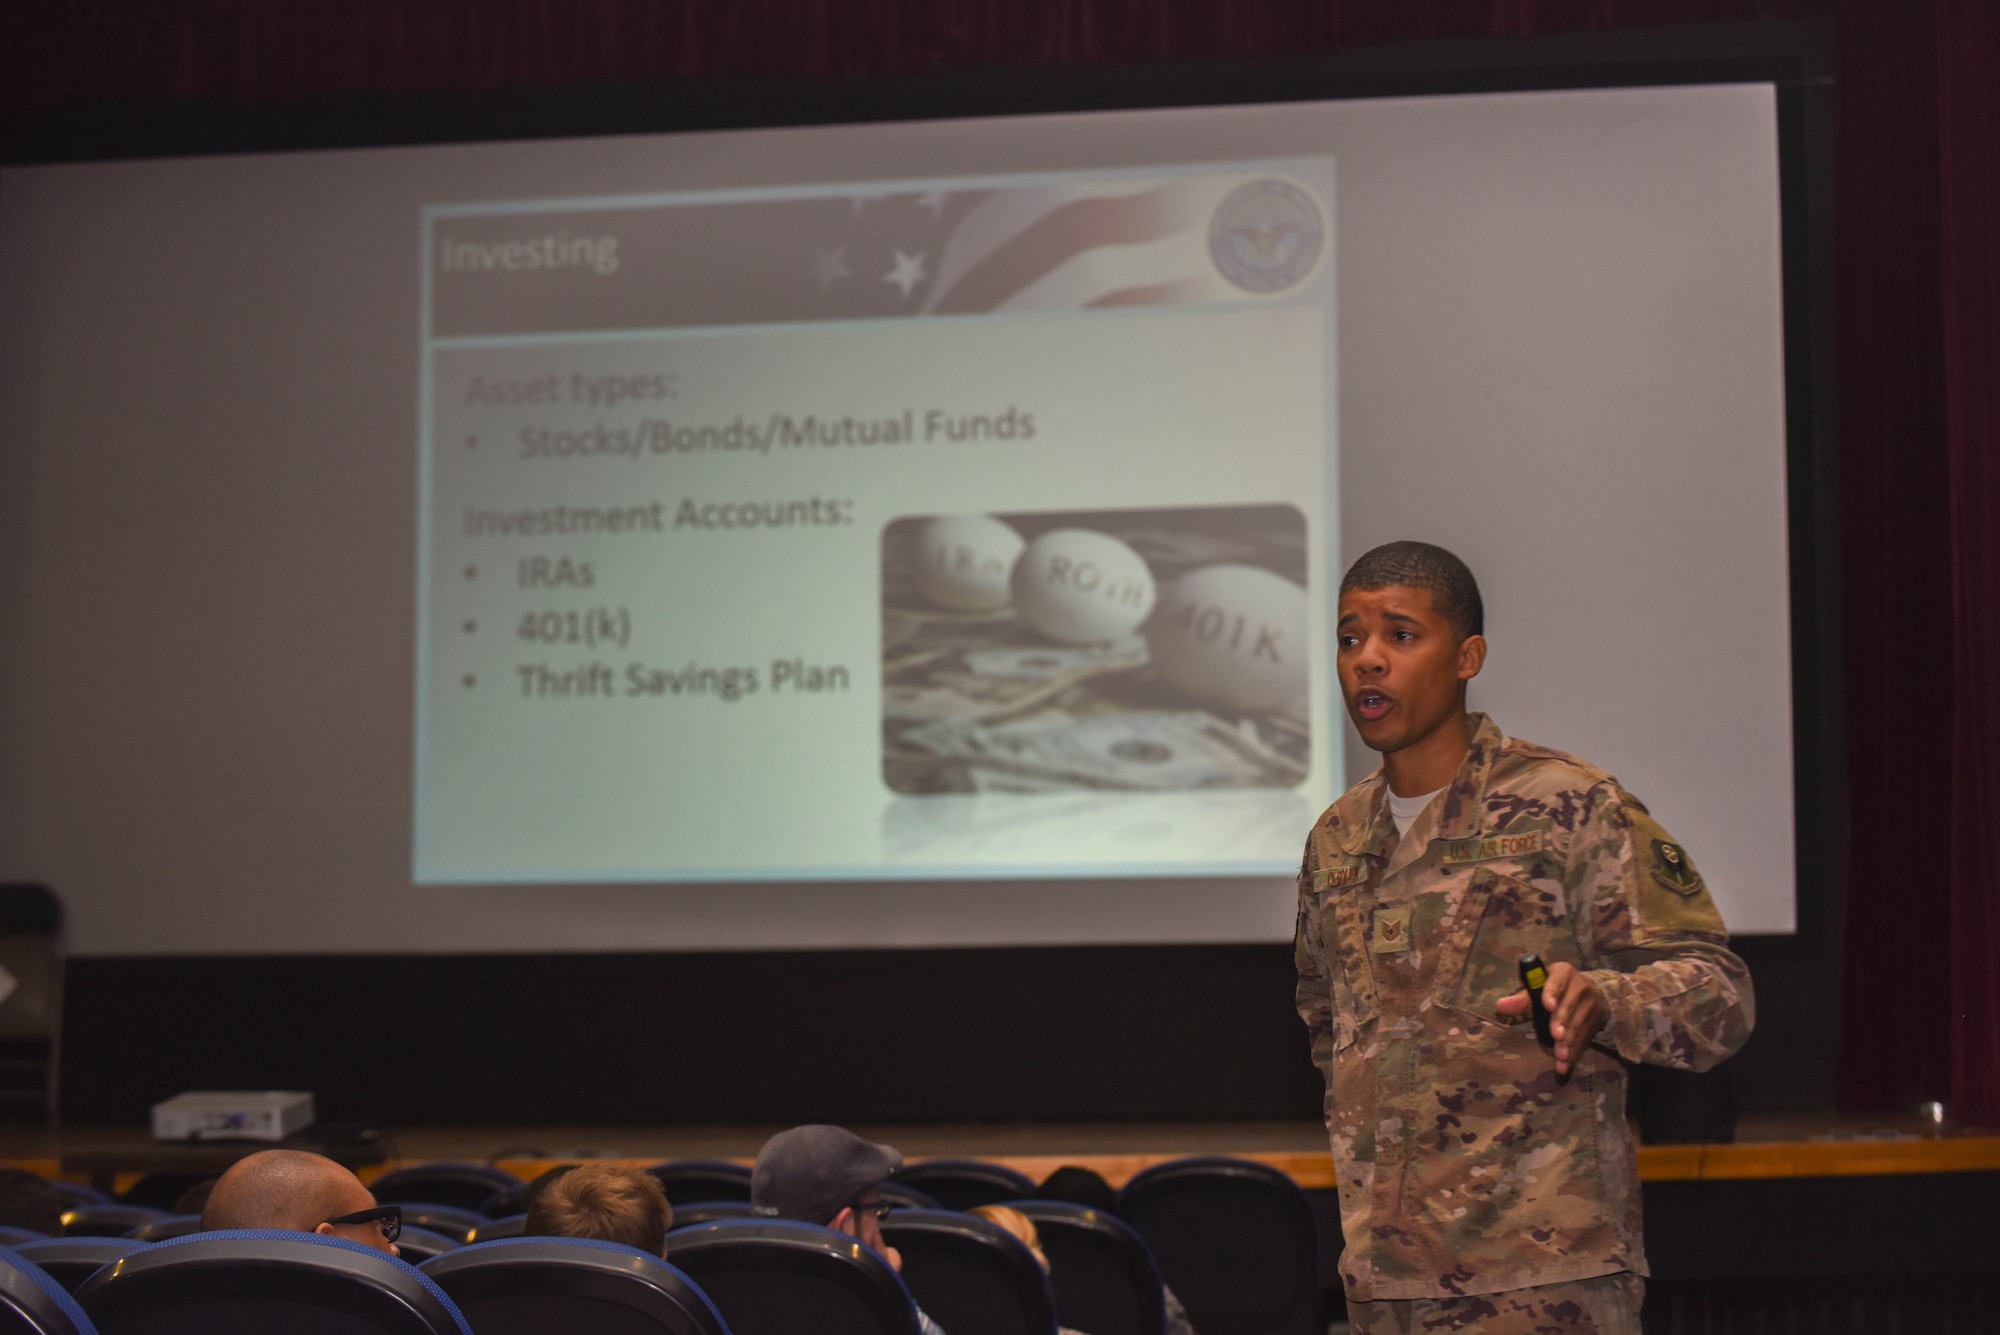 U.S. Air Force Tech. Sgt. Skylar DeRouen, 752nd Special Operations Aircraft Maintenance Squadron resource advisor, speaks to Airmen about basic investing principles at RAF Mildenhall, England, July 16, 2019. Airmen attended the professional development course, which was taught by DeRouen and the base personal financial counselor. (U.S. Air Force photo by Airman 1st Class Joseph Barron)